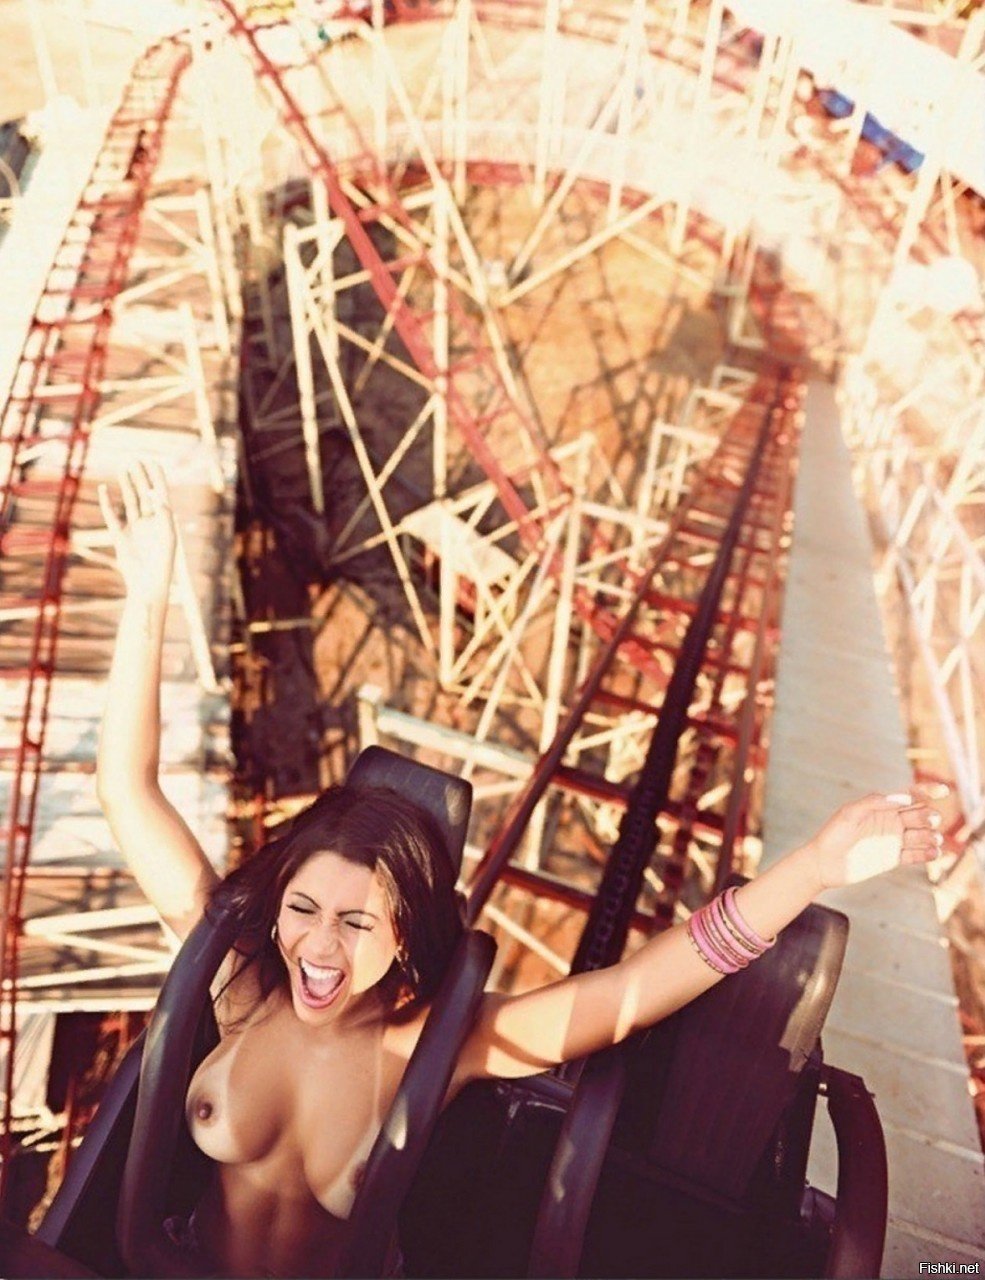 Tits out on roller coaster